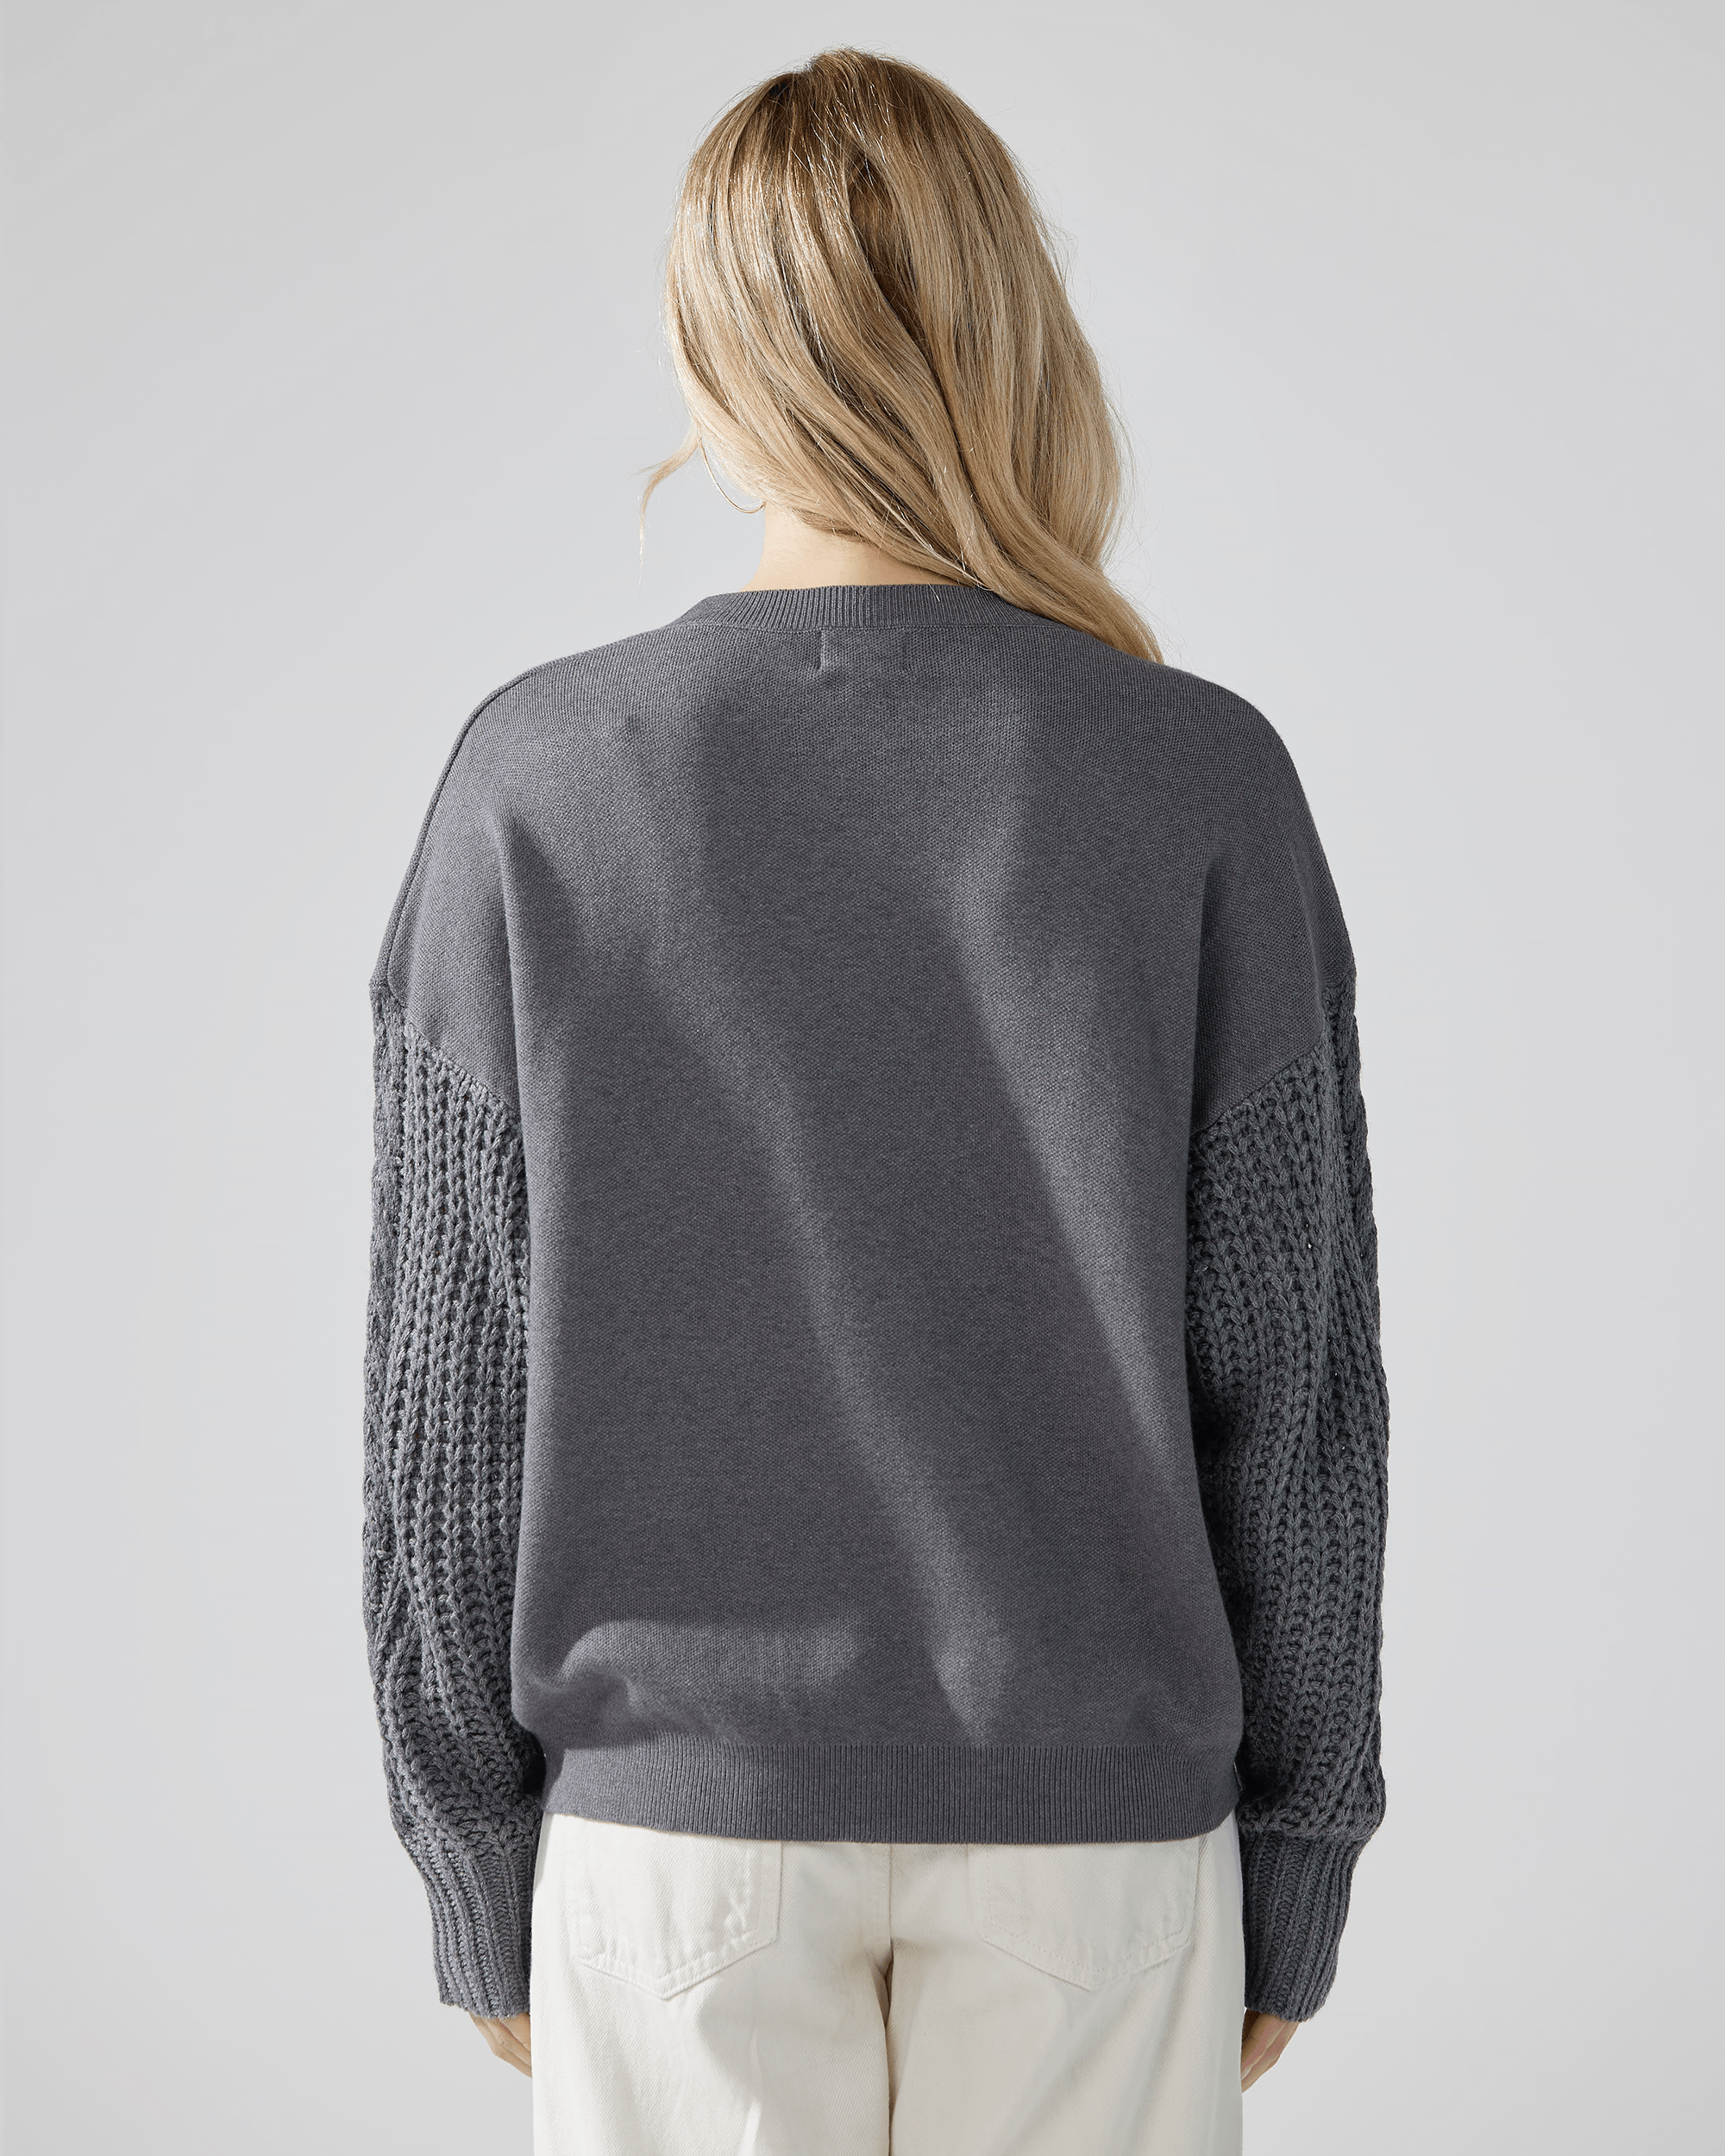 Charcoal Grey Sweater: Cozy Cable Knit